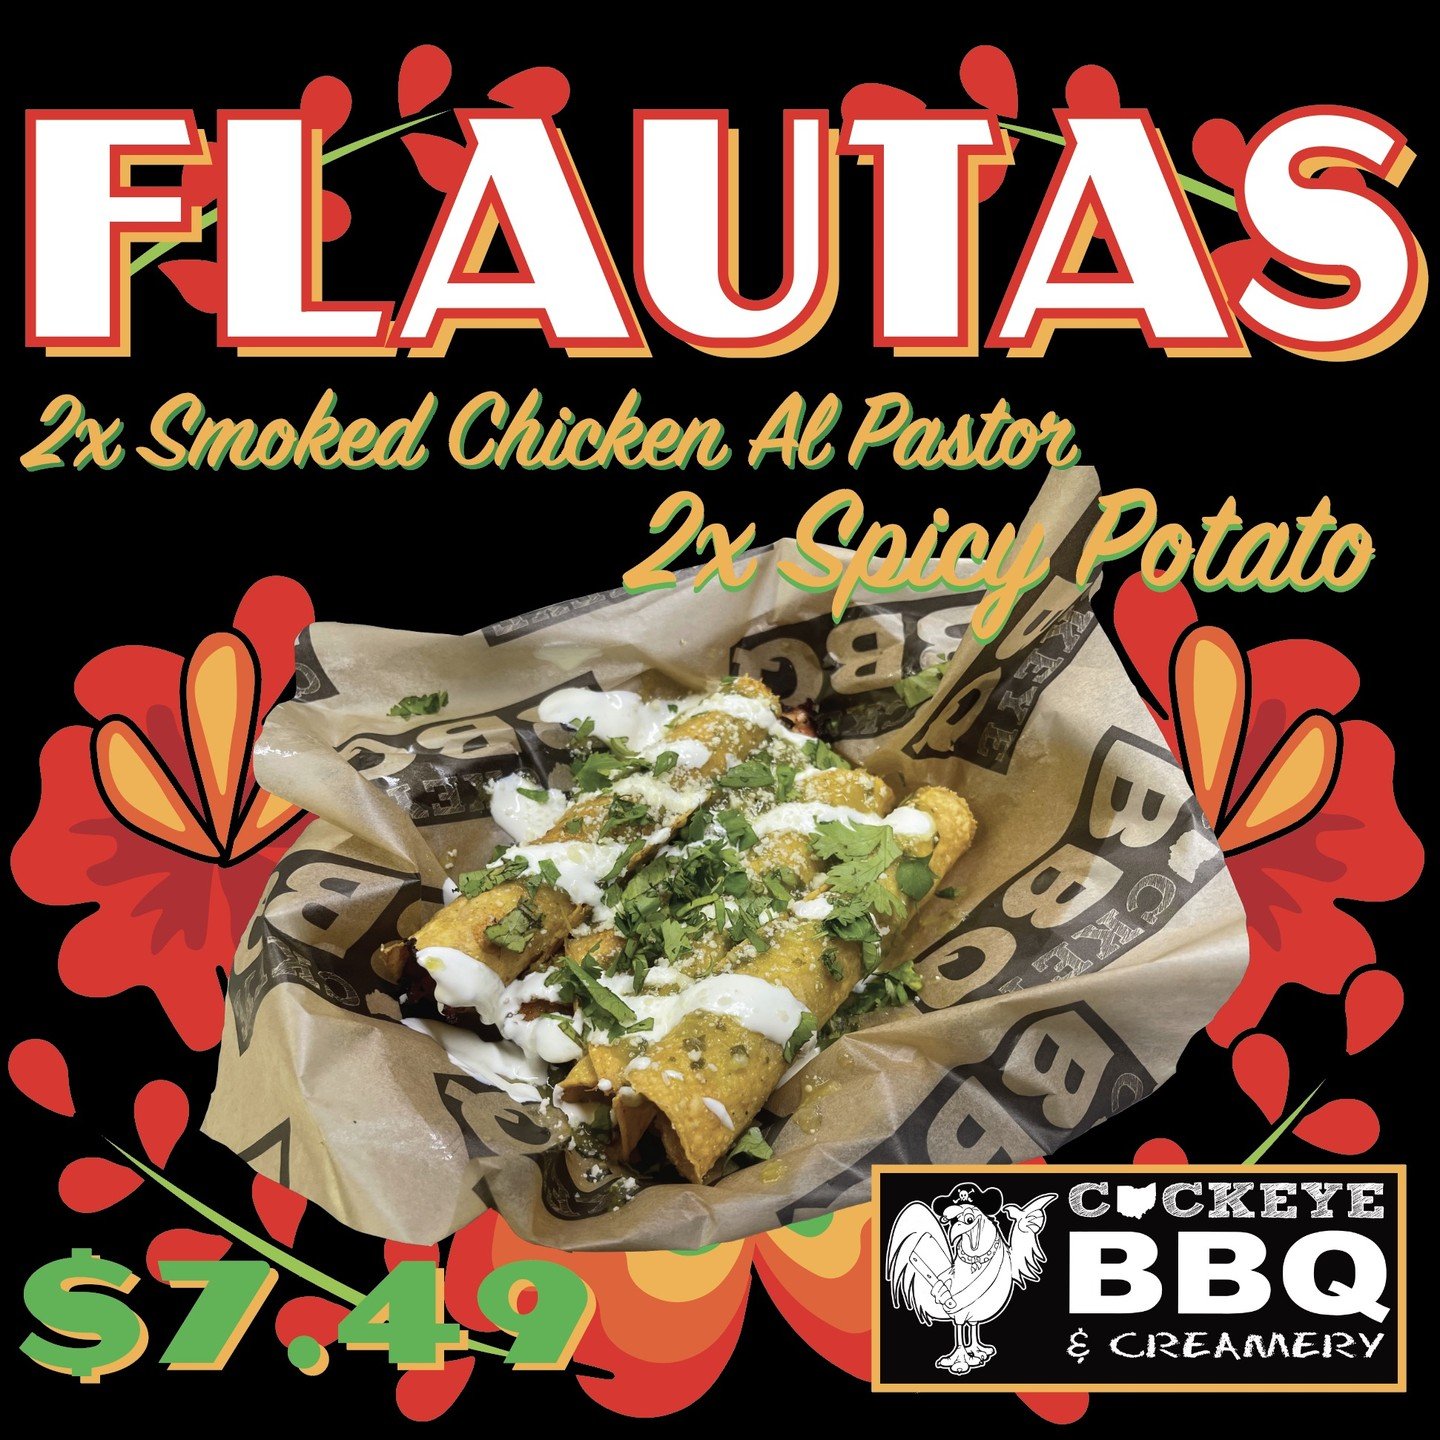 FLAUTAS! We all have all sorts of fun specials on the Clothesline for Cinco De Mayo!
Crispy Corn Tortillas stuffed with Smoked Chicken Al Pastor or Spicy Potato filling. (Order comes with 2 of each). Striped with House-Made Salsa Verde and Sour Cream